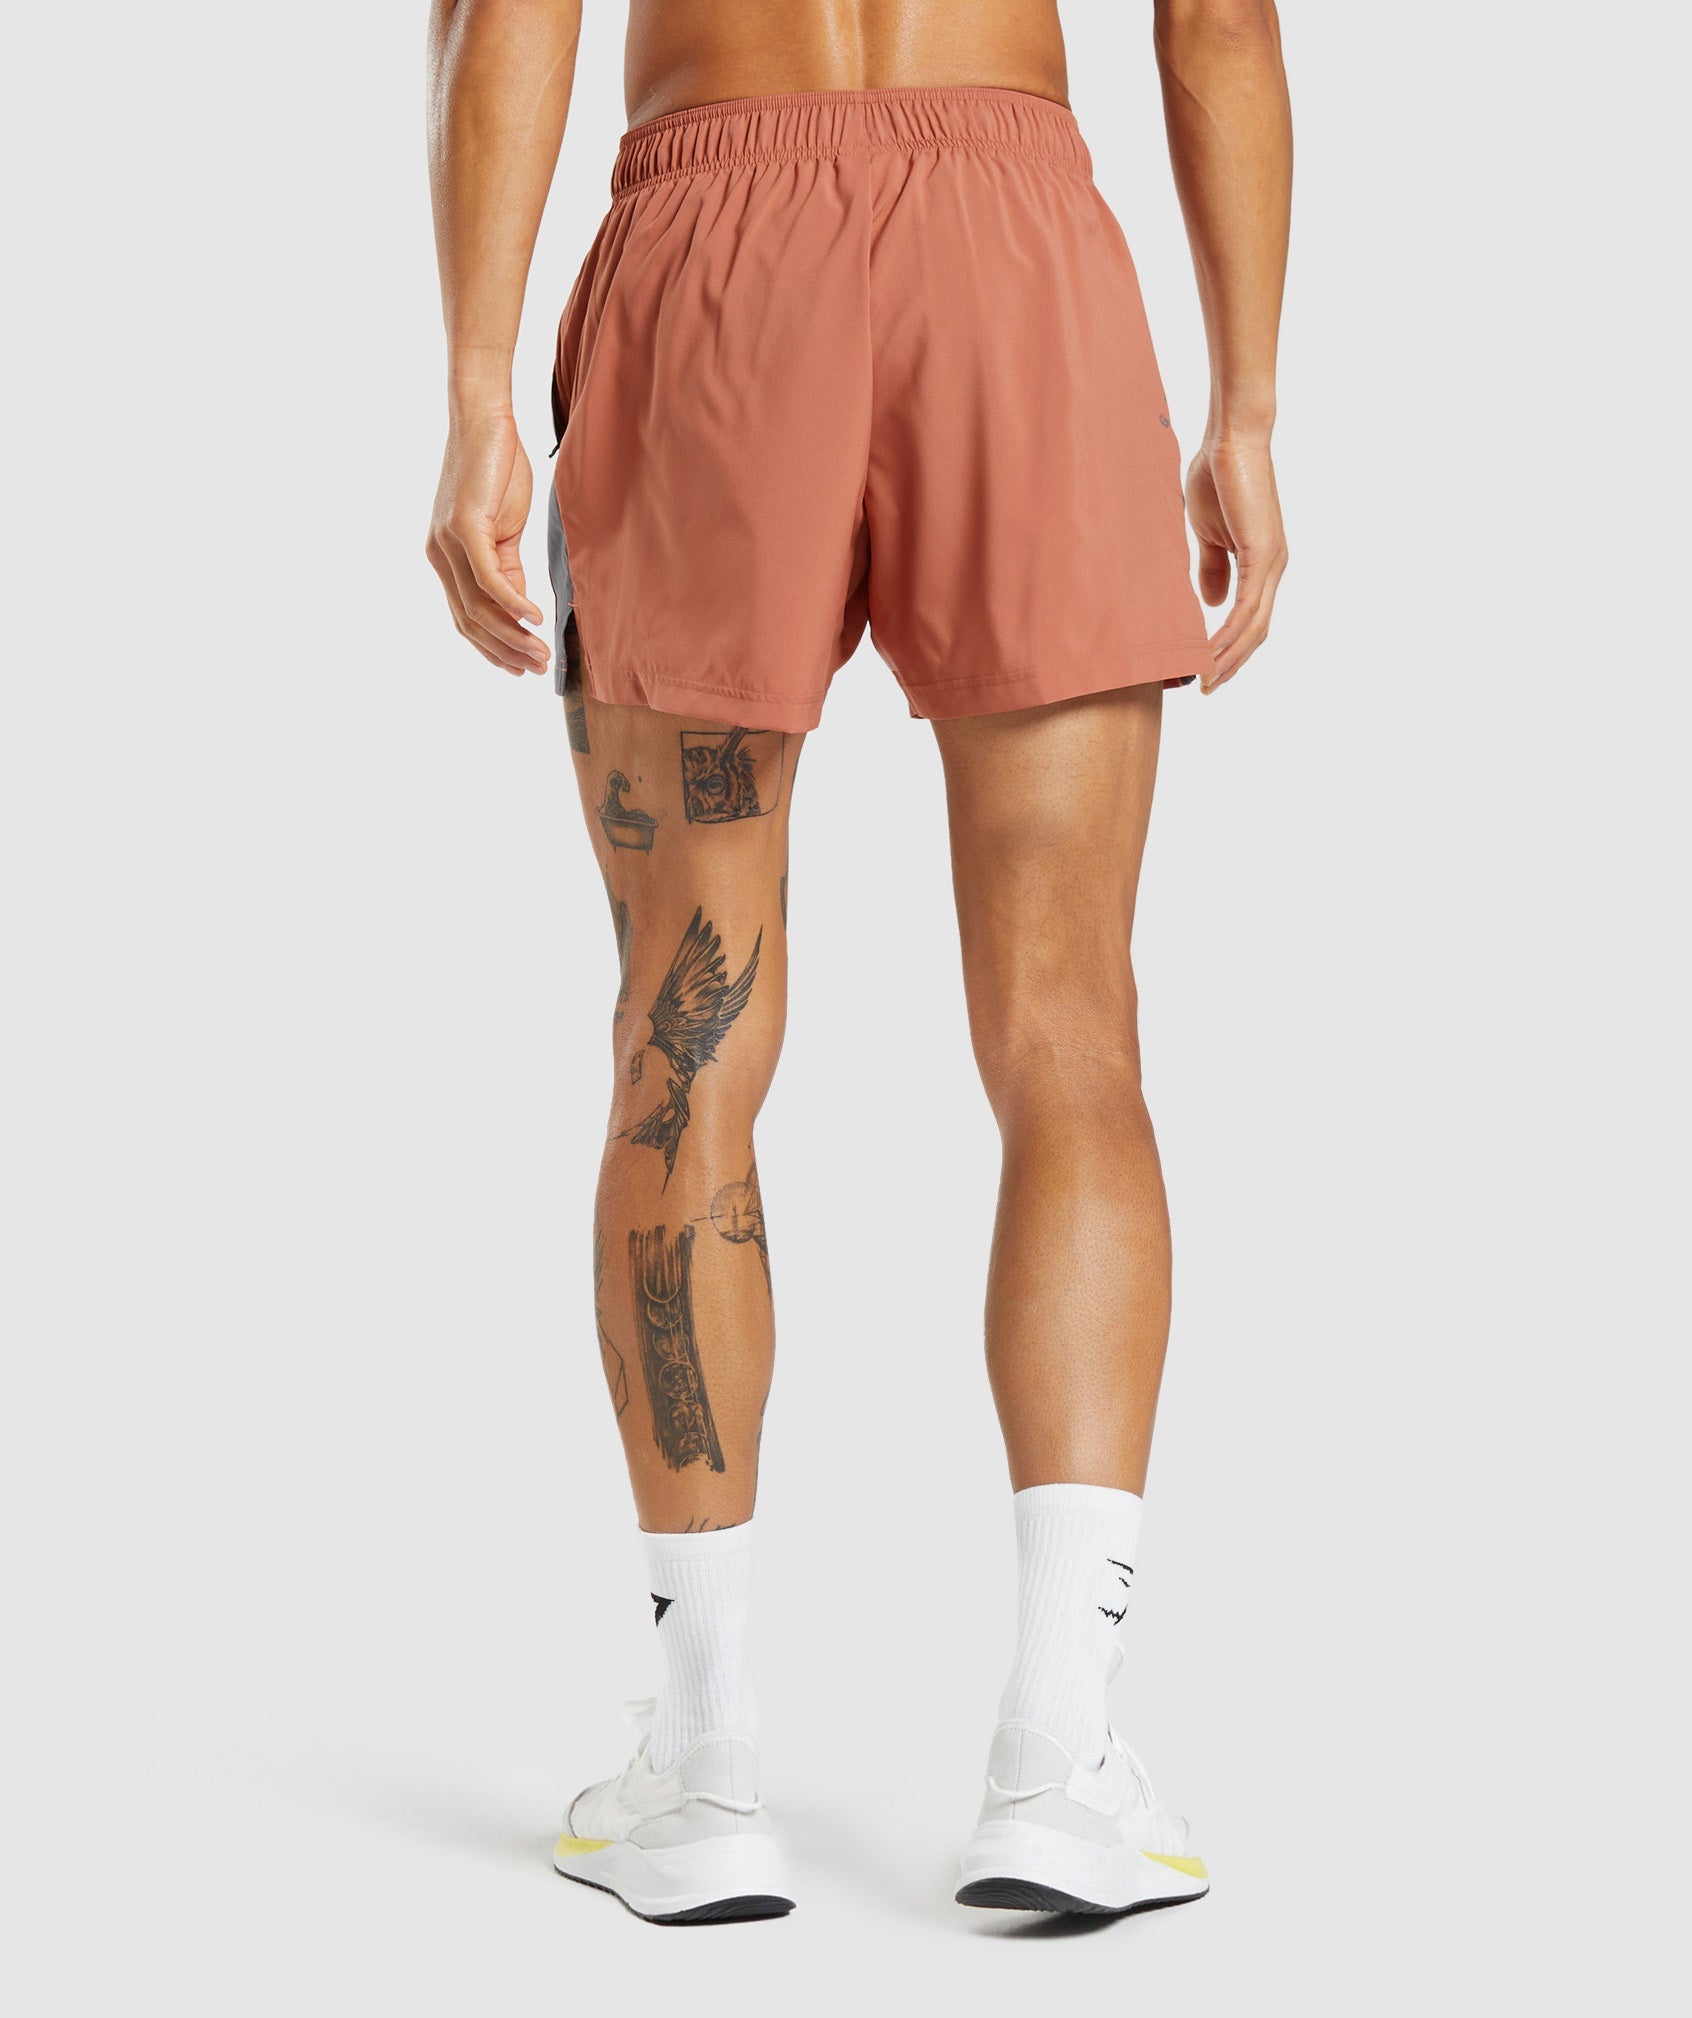 Sport 5" Shorts in Persimmon Red/Silhouette Grey - view 2